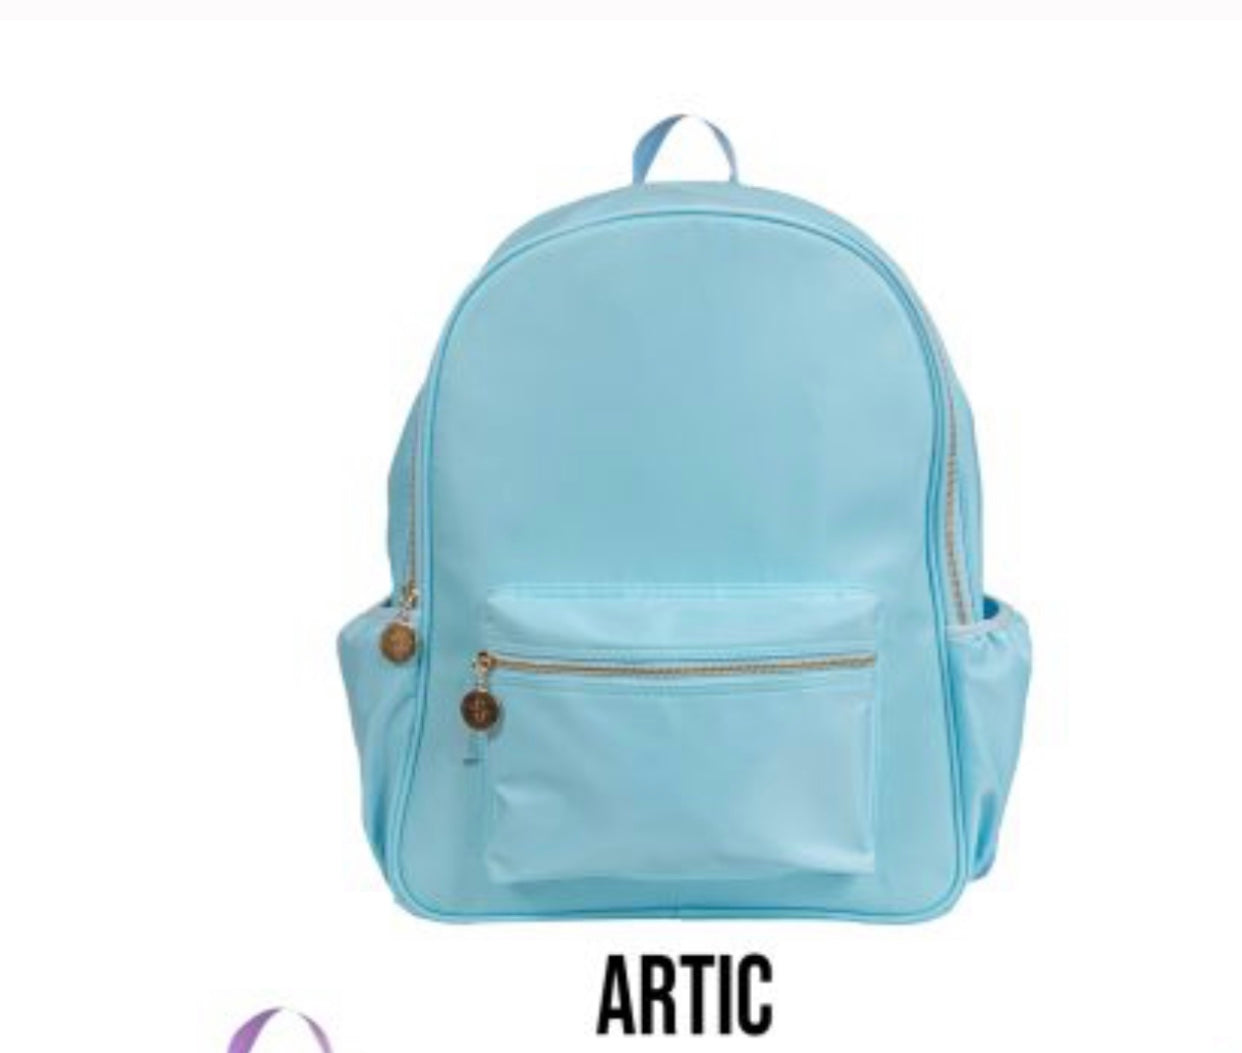 SIMPLY SOUTHERN BACKPACK ARCTIC